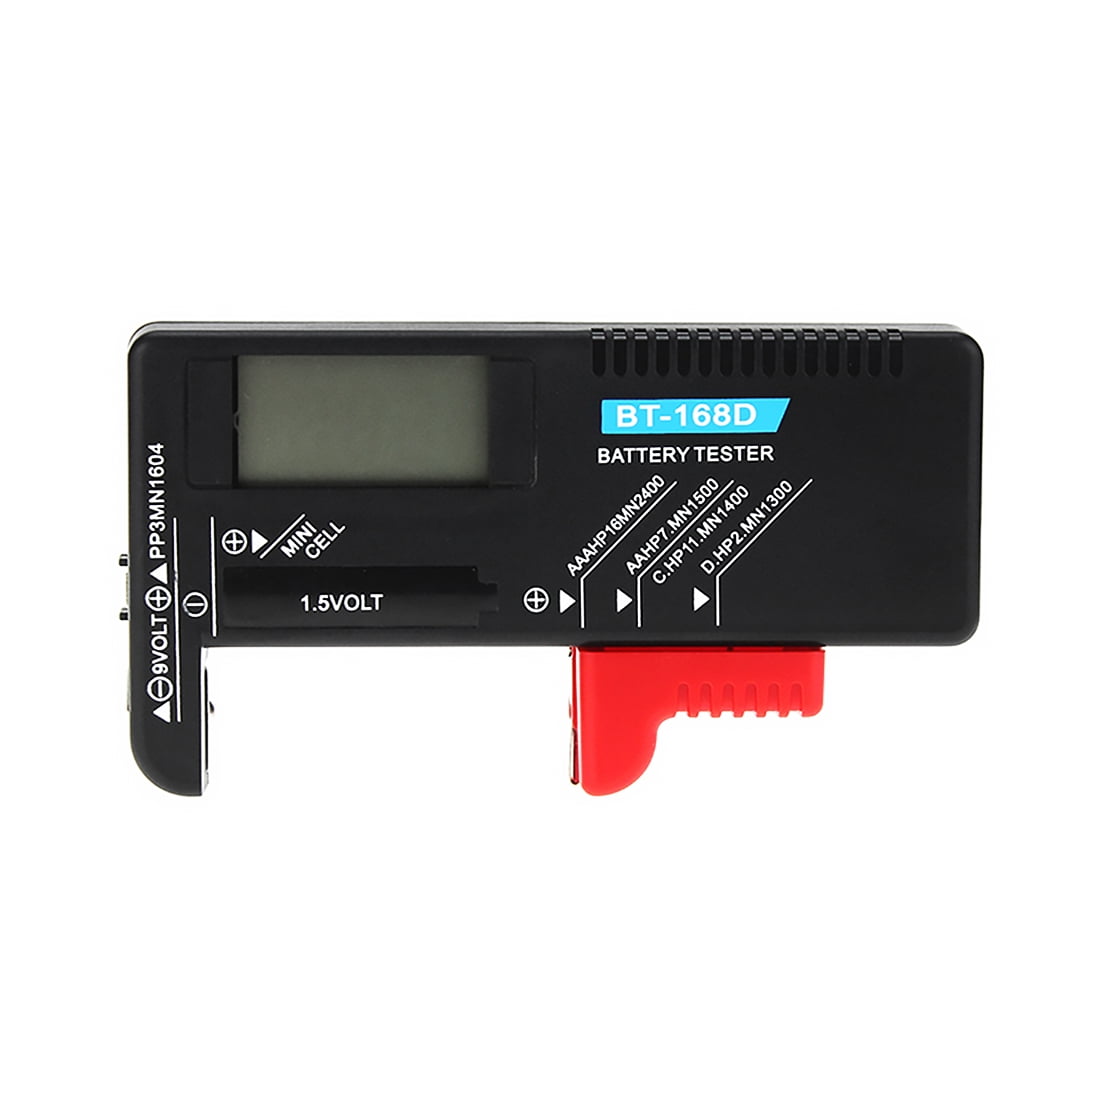 AAA Digital Universal Battery Tester BT-168D 1.5V 9V Button Cell Rechargeable 